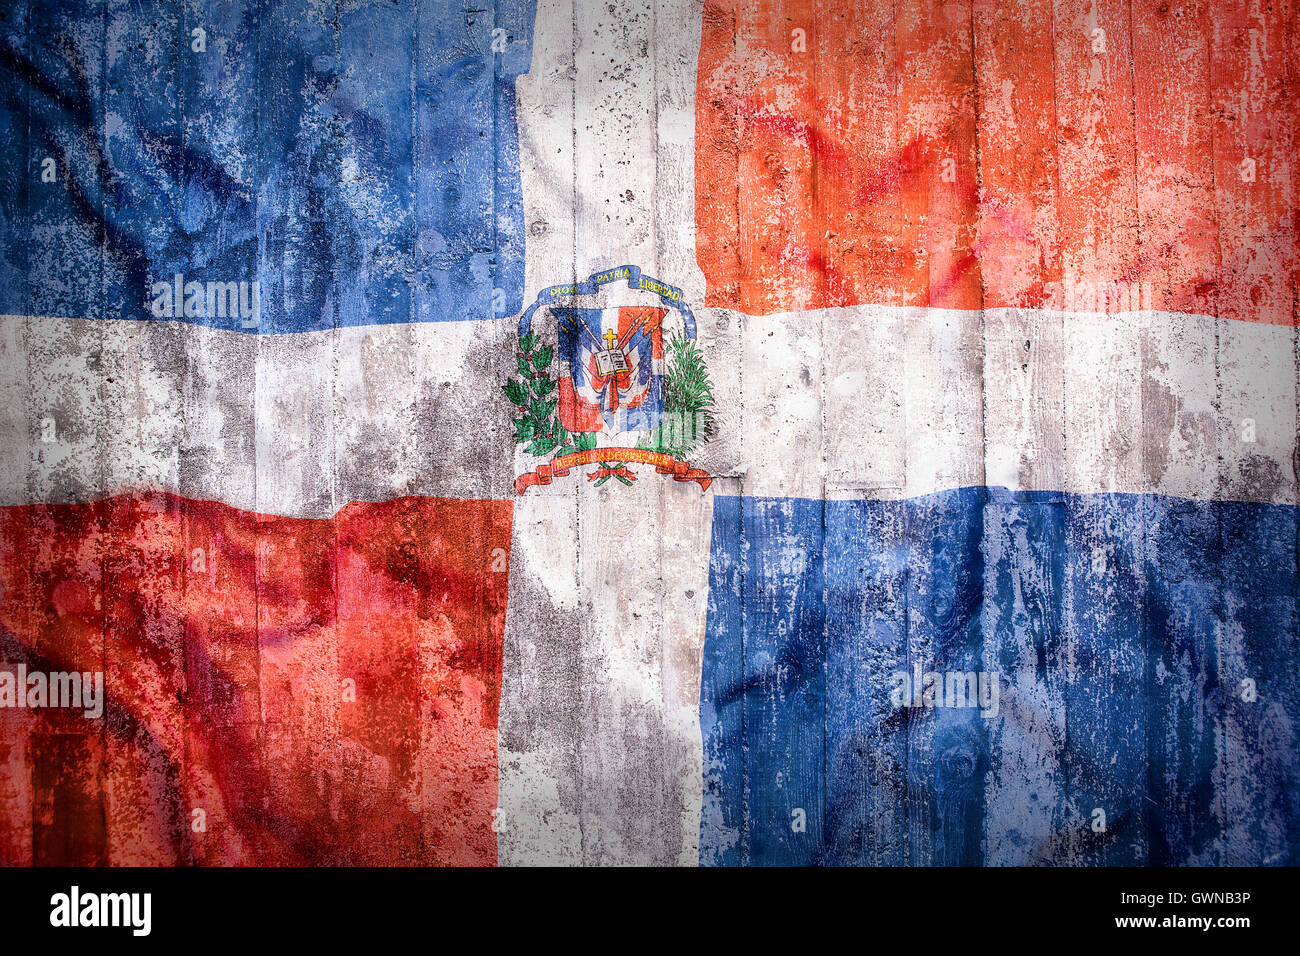 Grunge style of Dominican Republic flag on a brick wall for background Stock Photo